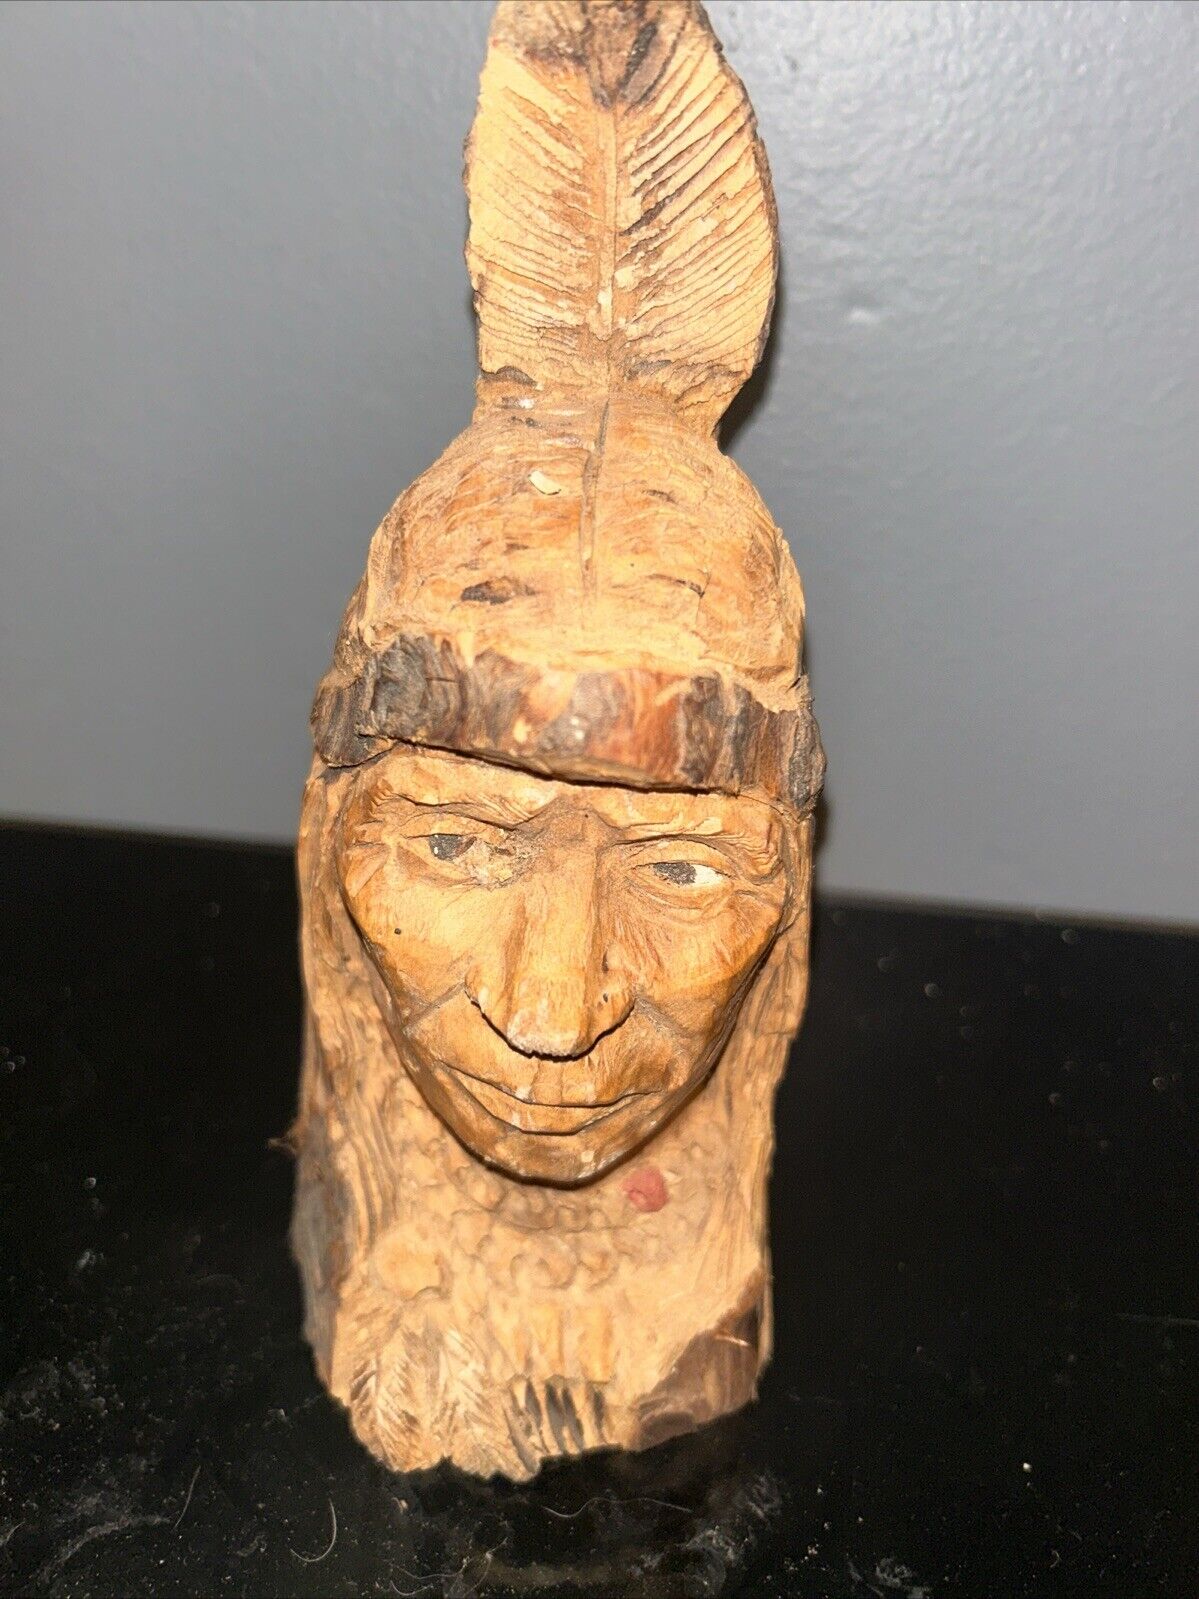 Native American Wood Carving Busy Sculpture